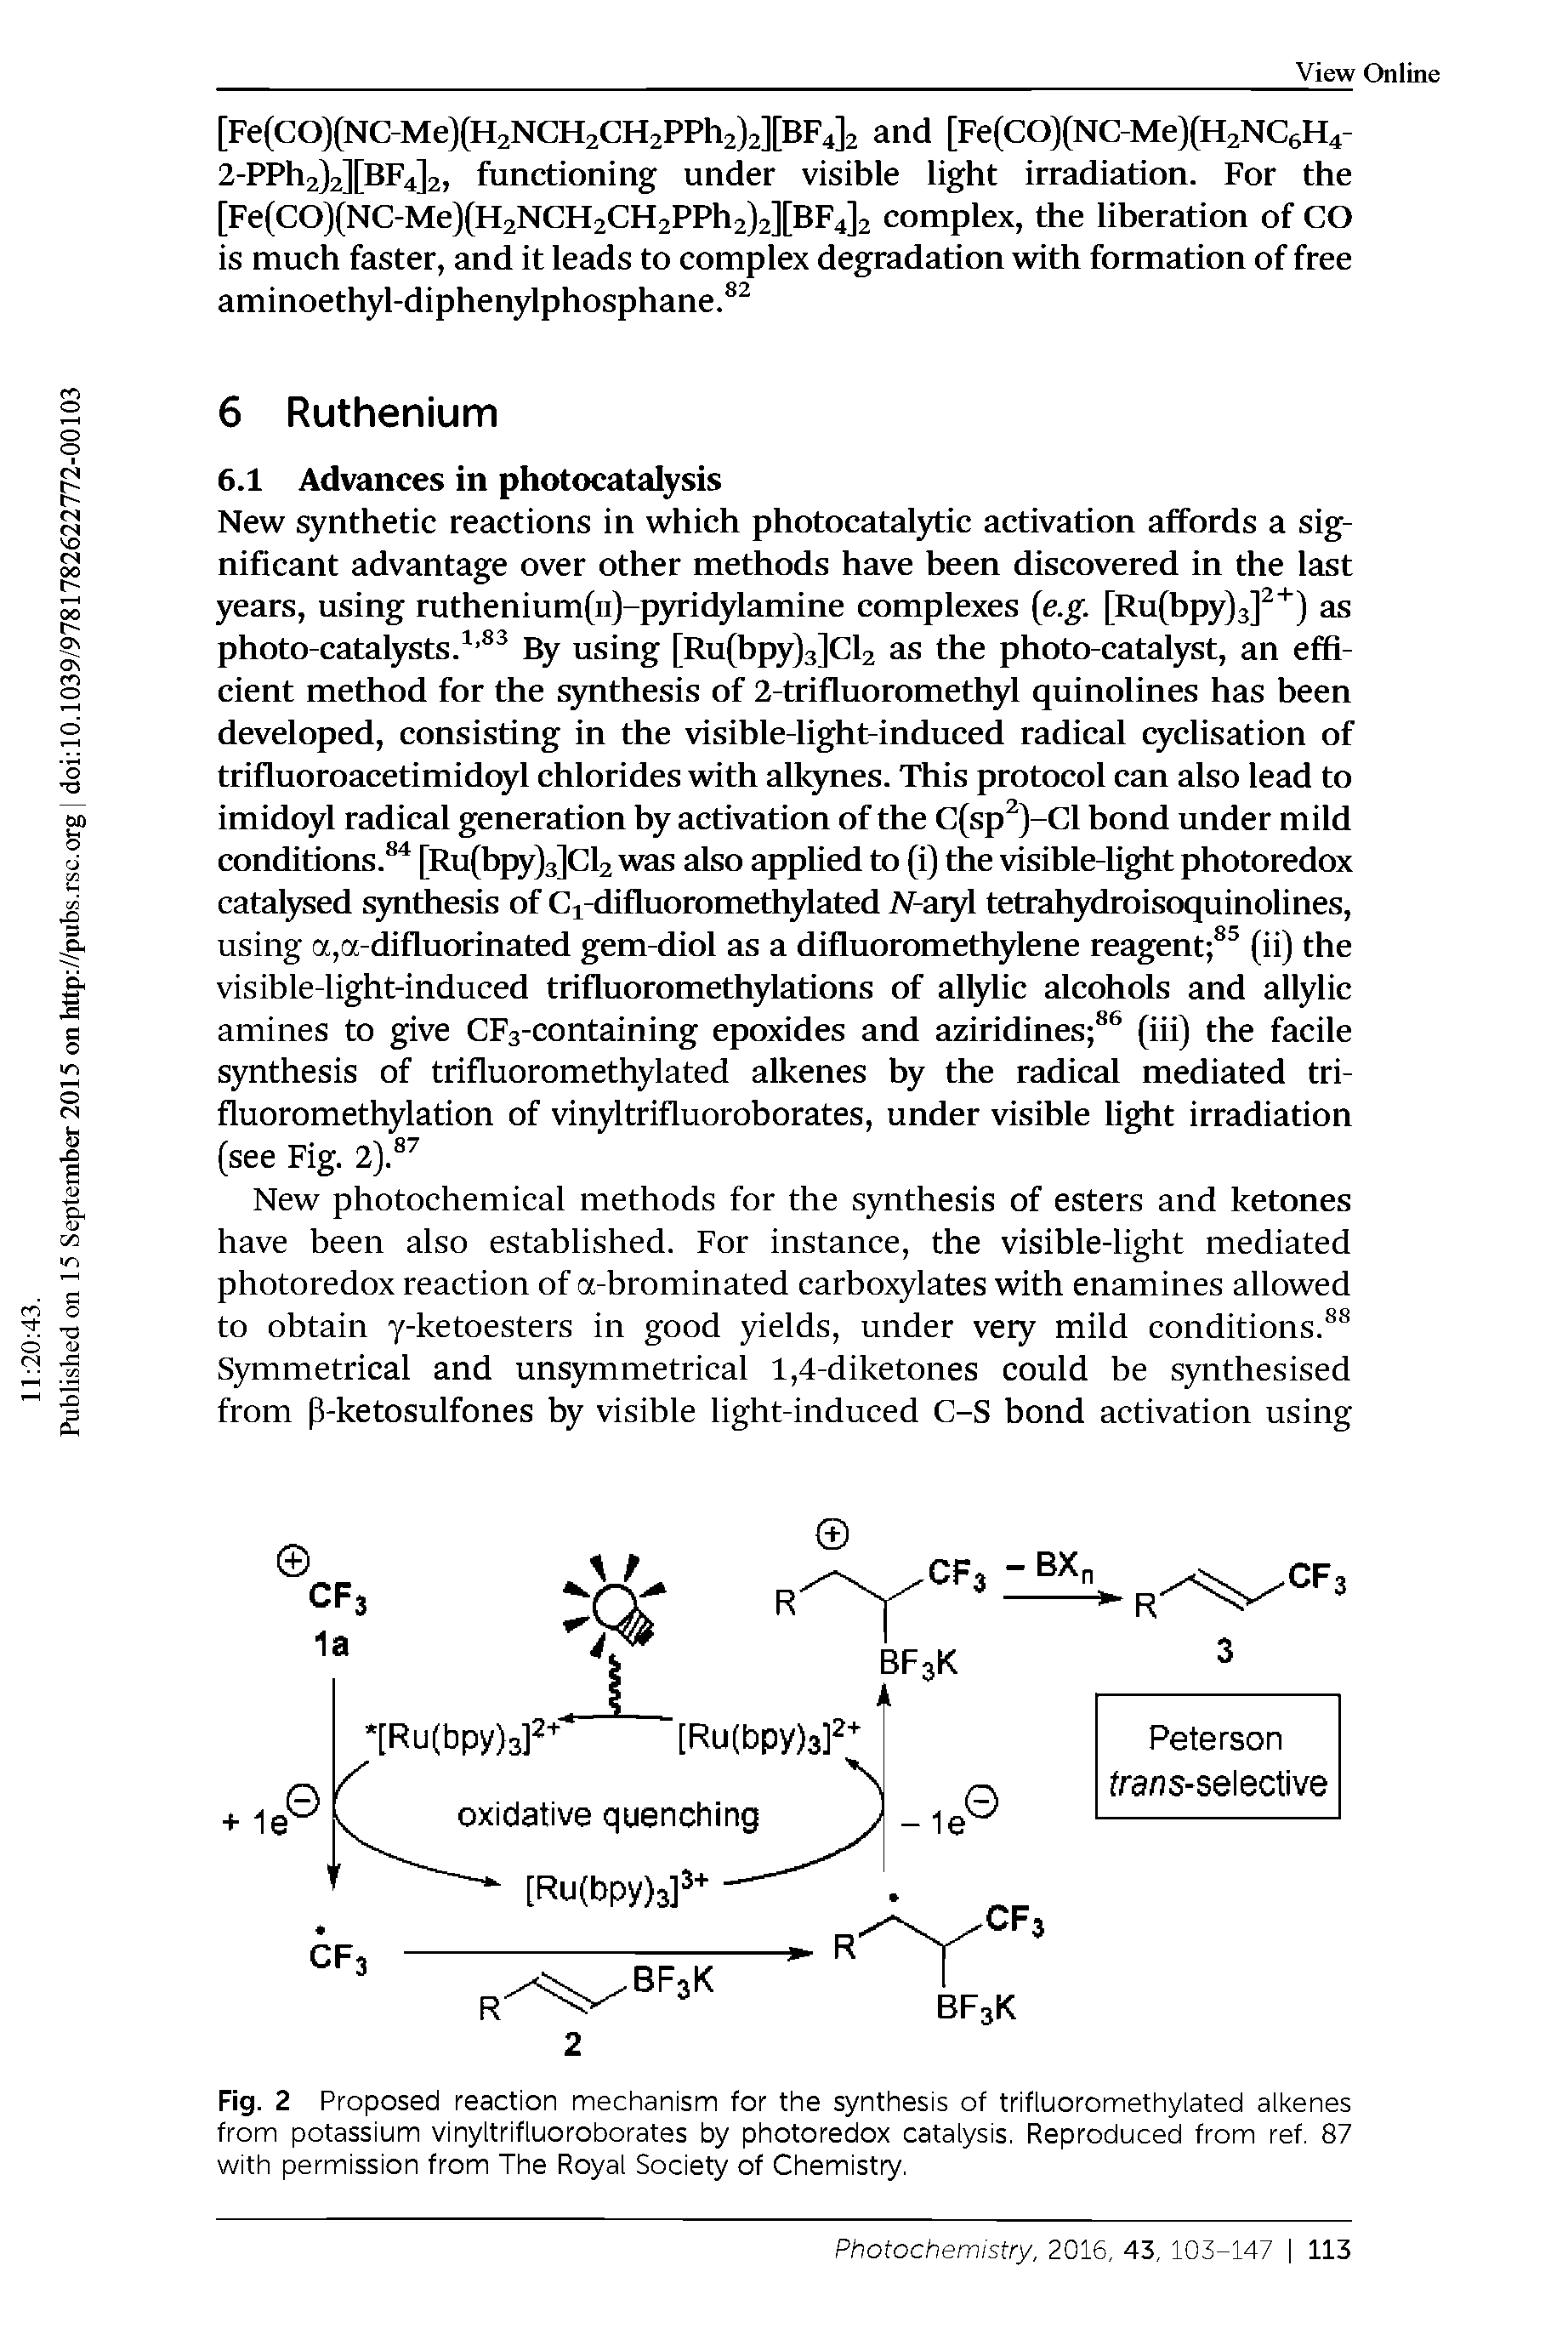 Fig. 2 Proposed reaction mechanism for the synthesis of trifluoromethylated alkenes from potassium vinyltrifluoroborates by photoredox catalysis. Reproduced from ref. 87 with permission from The Royal Society of Chemistry.